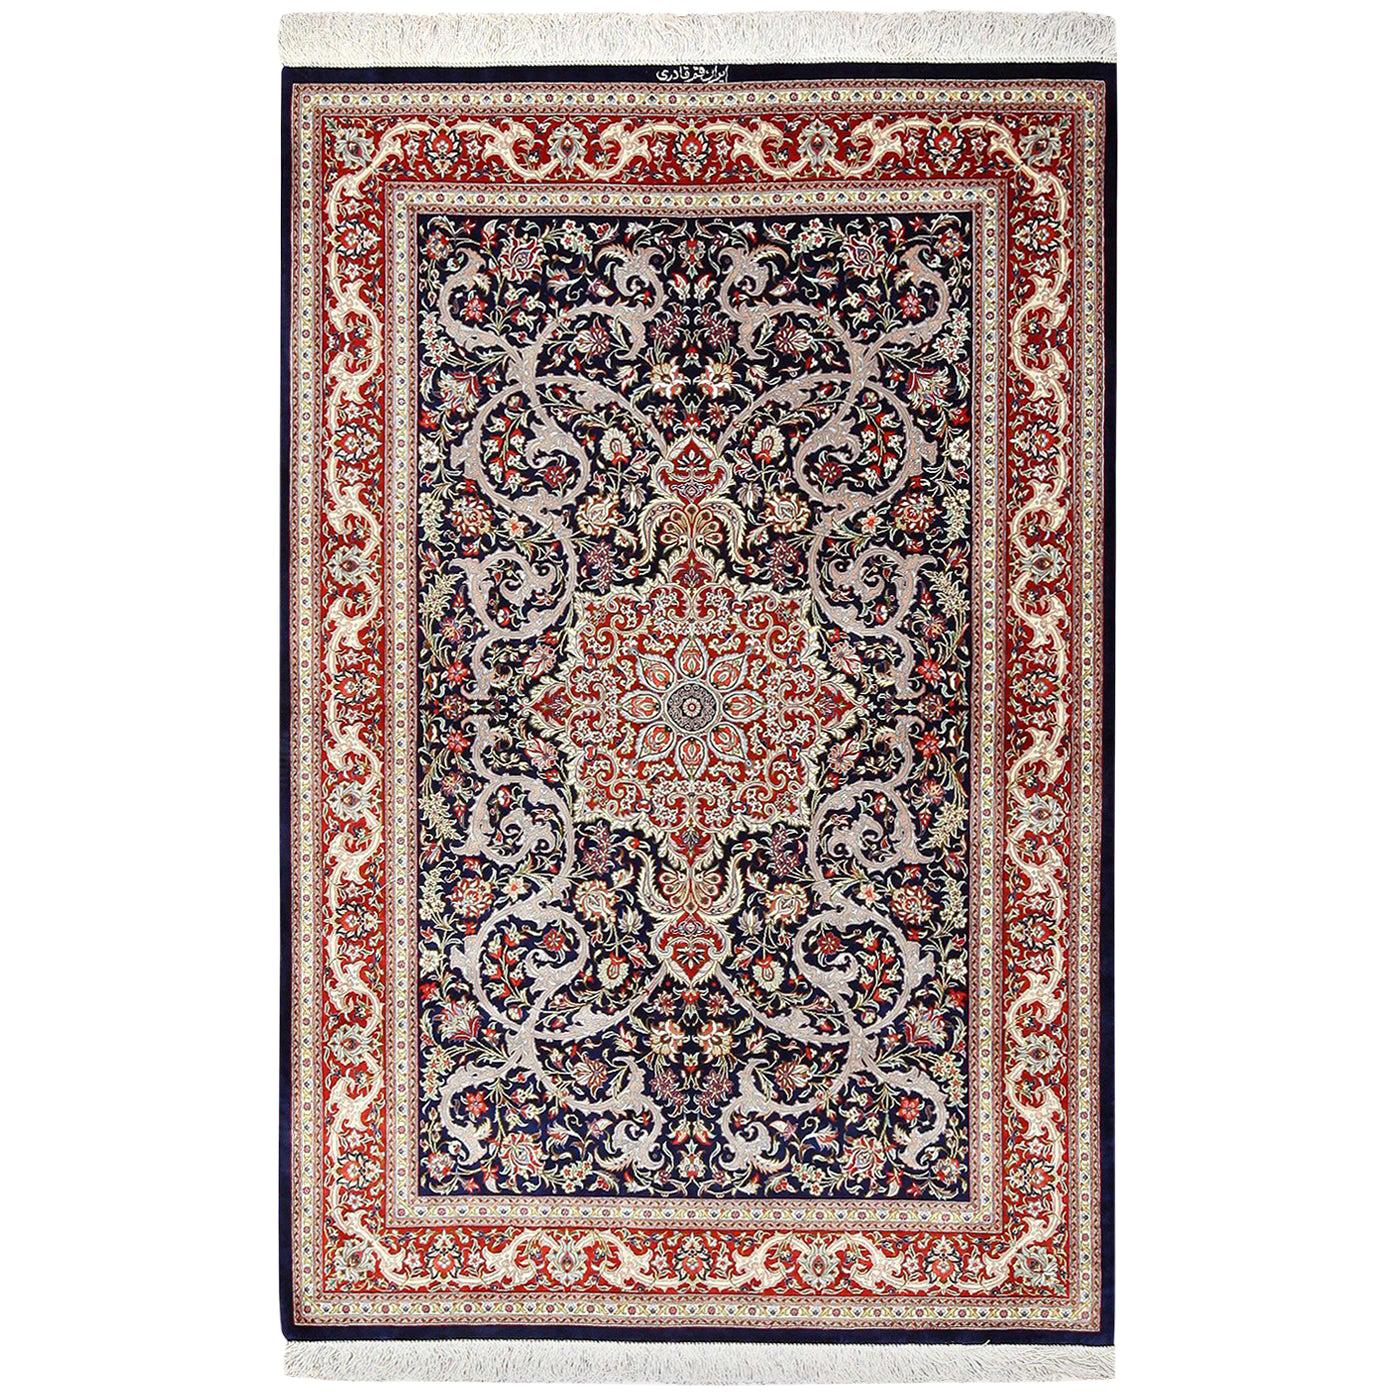 Silk Persian Qum Rug. Size: 3 ft 4 in x 5 ft 